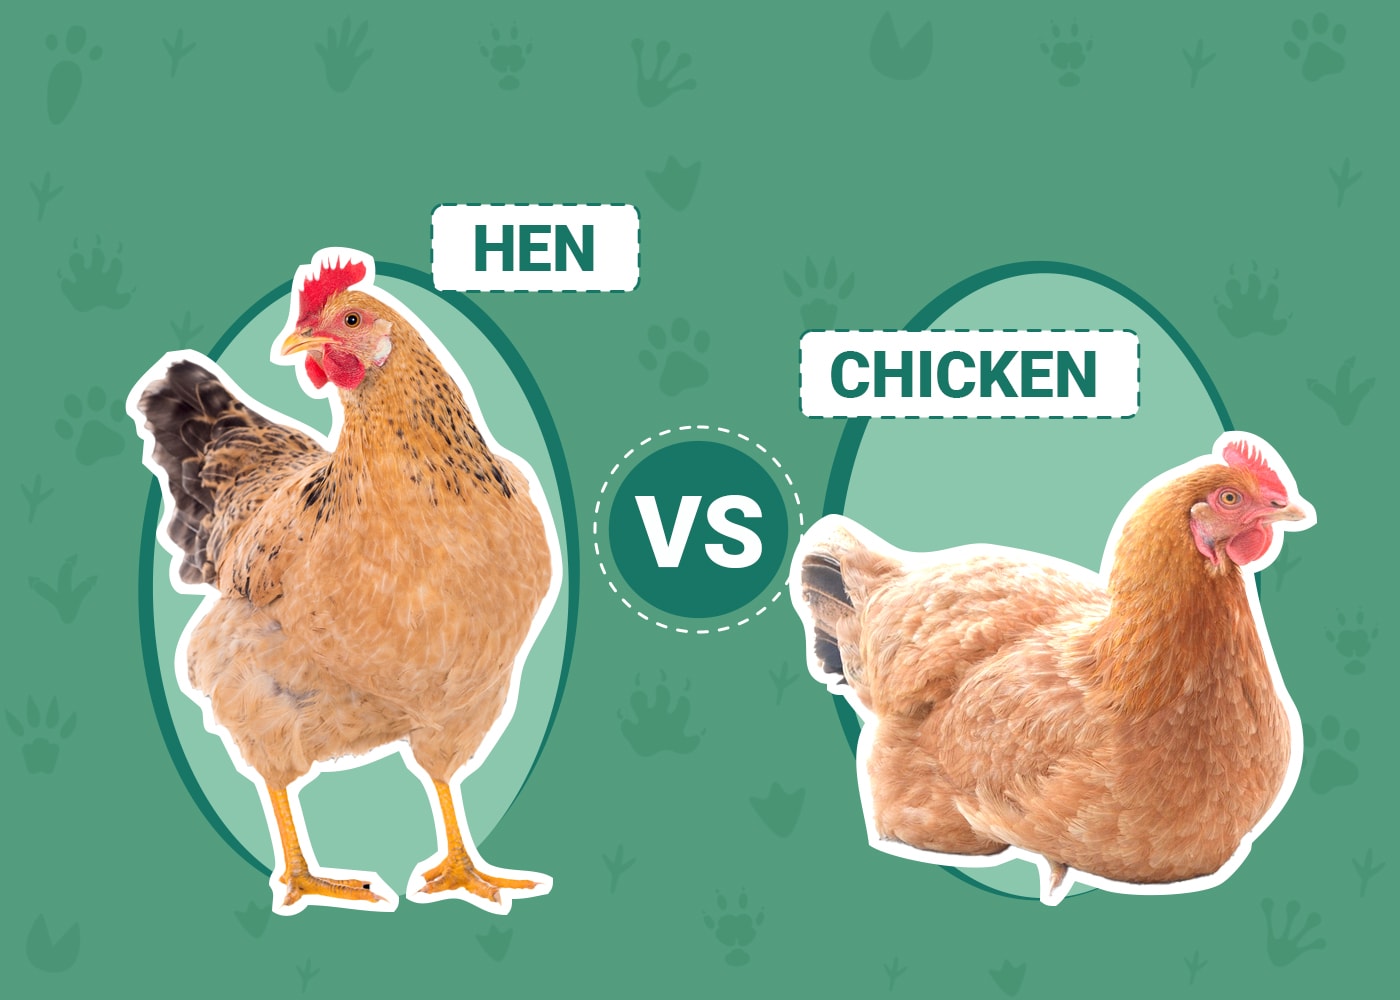 Hen Vs Chicken: Do You Know The Difference?